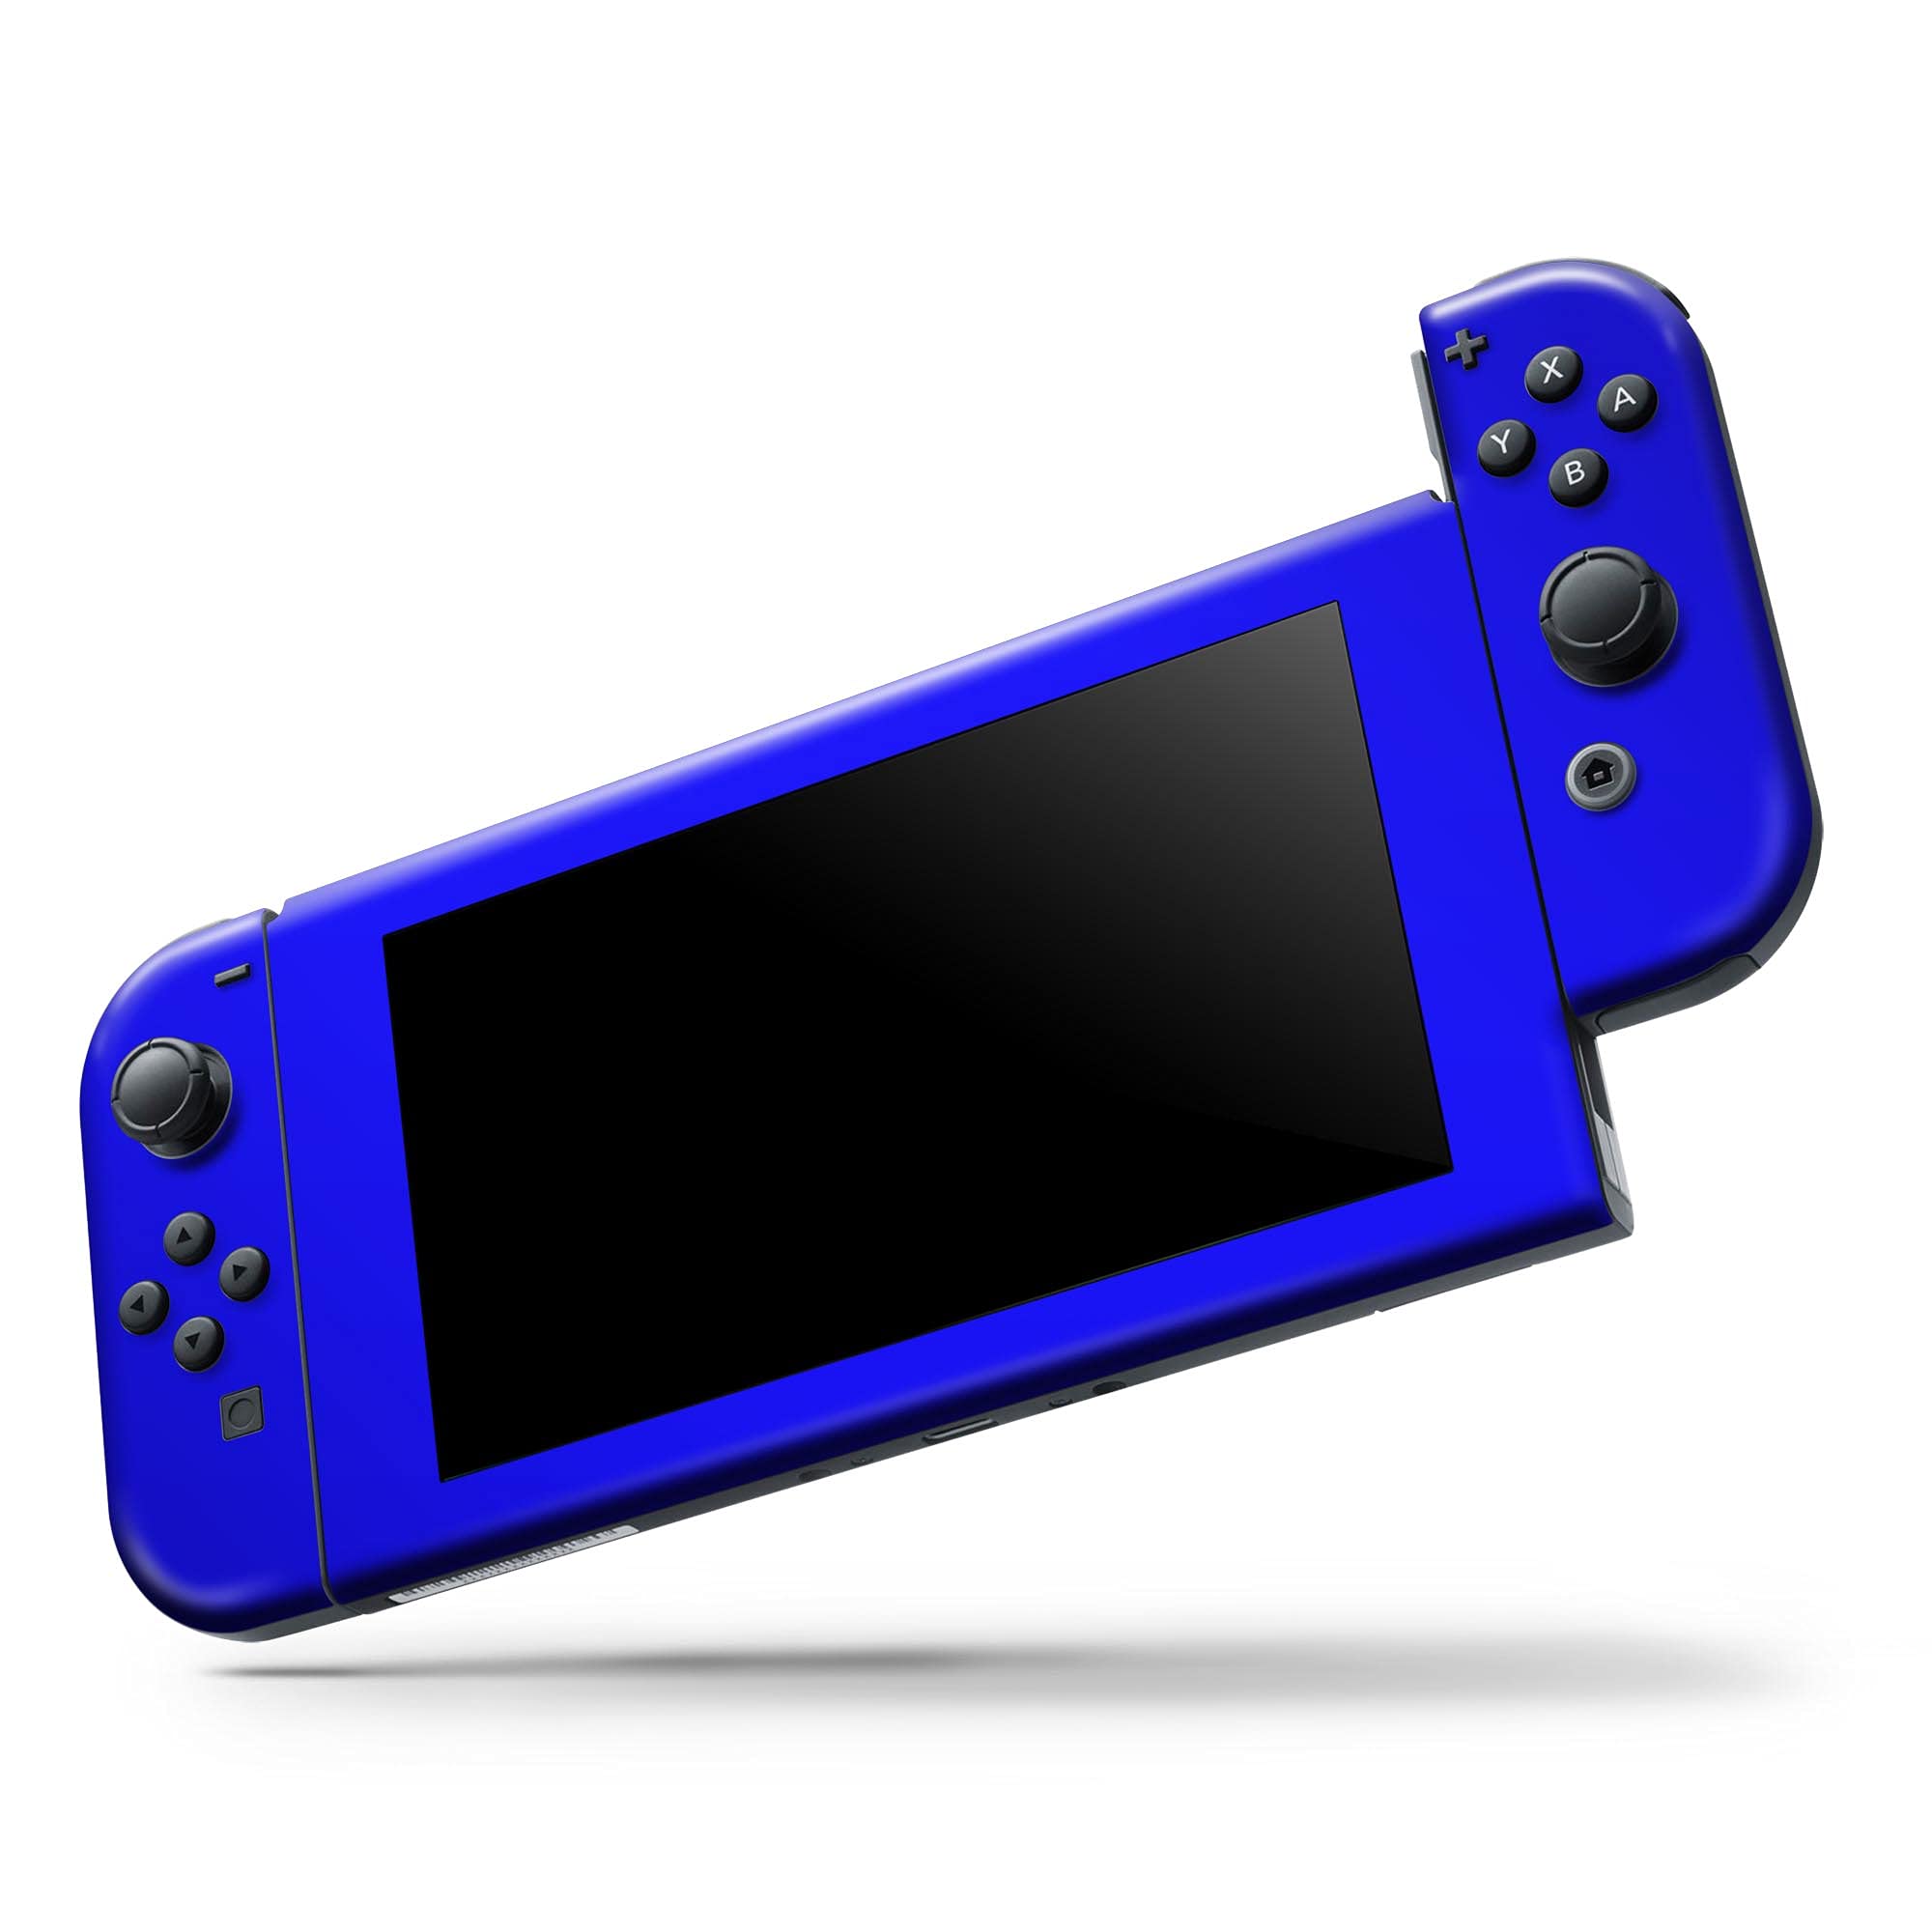 Design Skinz - Compatible with Nintendo Switch OLED Console + Joy-Con - Skin Decal Protective Scratch-Resistant Removable Vinyl Wrap Cover - Solid Royal Blue